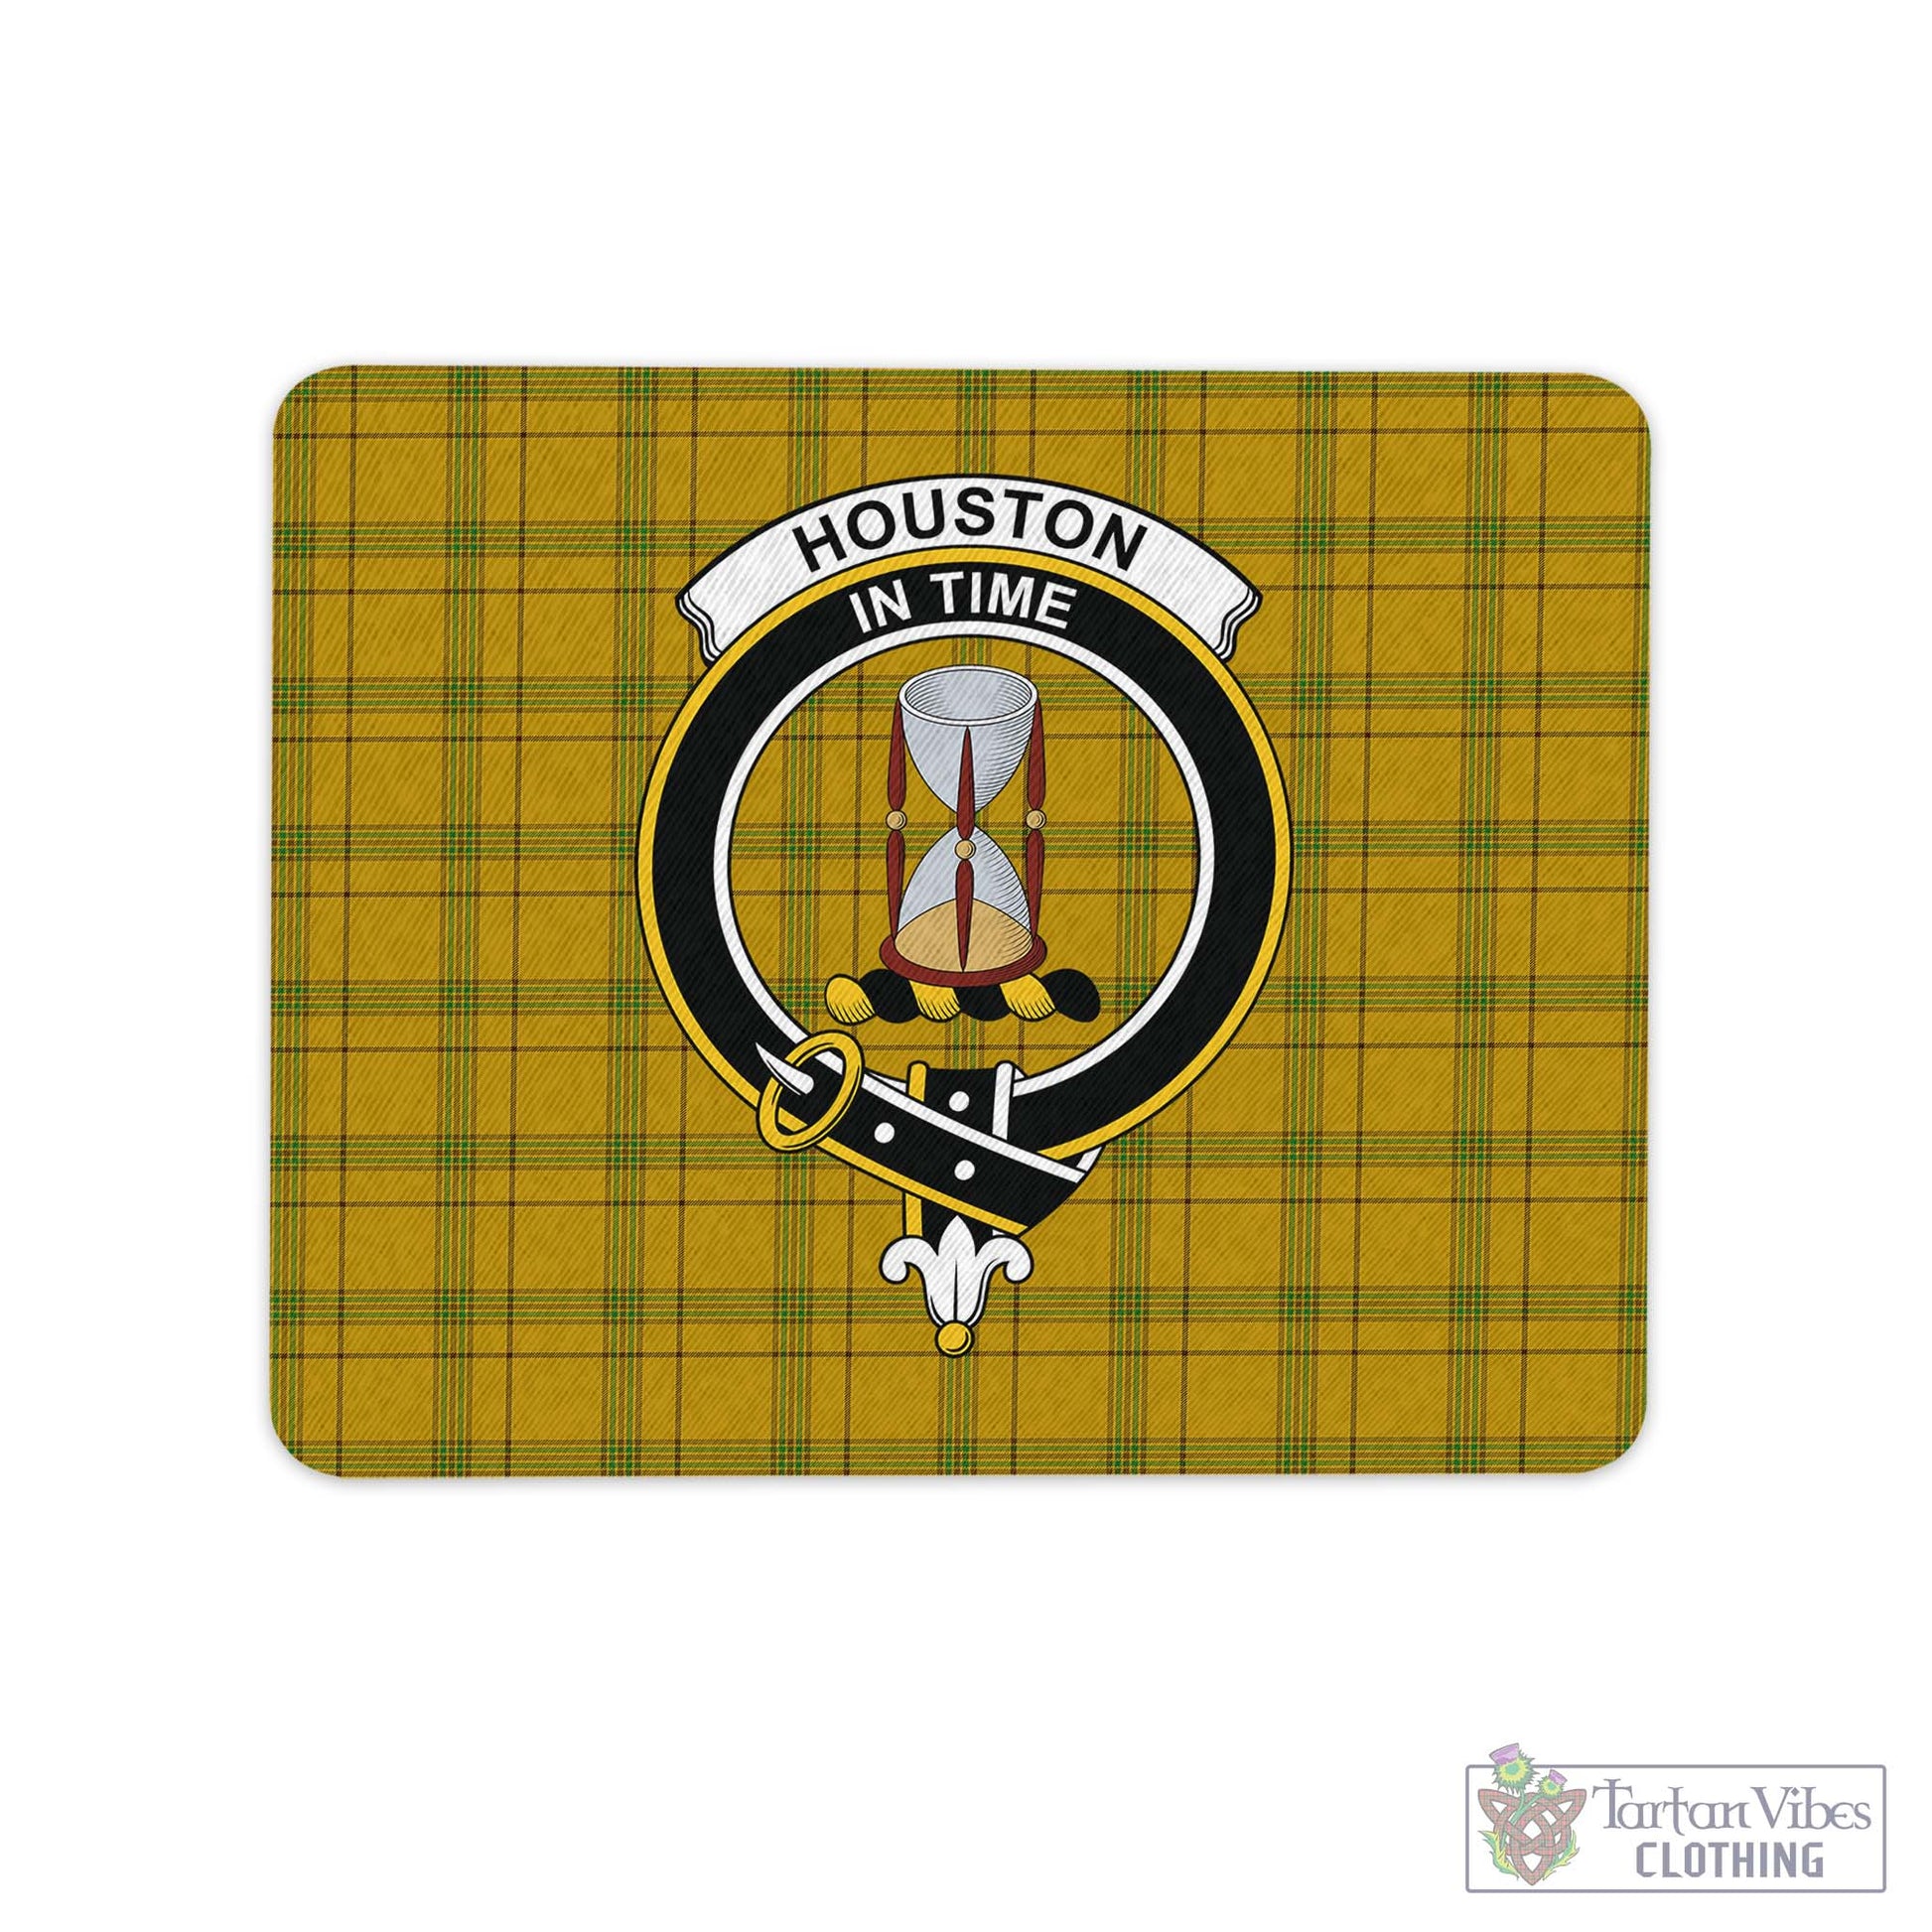 Tartan Vibes Clothing Houston Tartan Mouse Pad with Family Crest